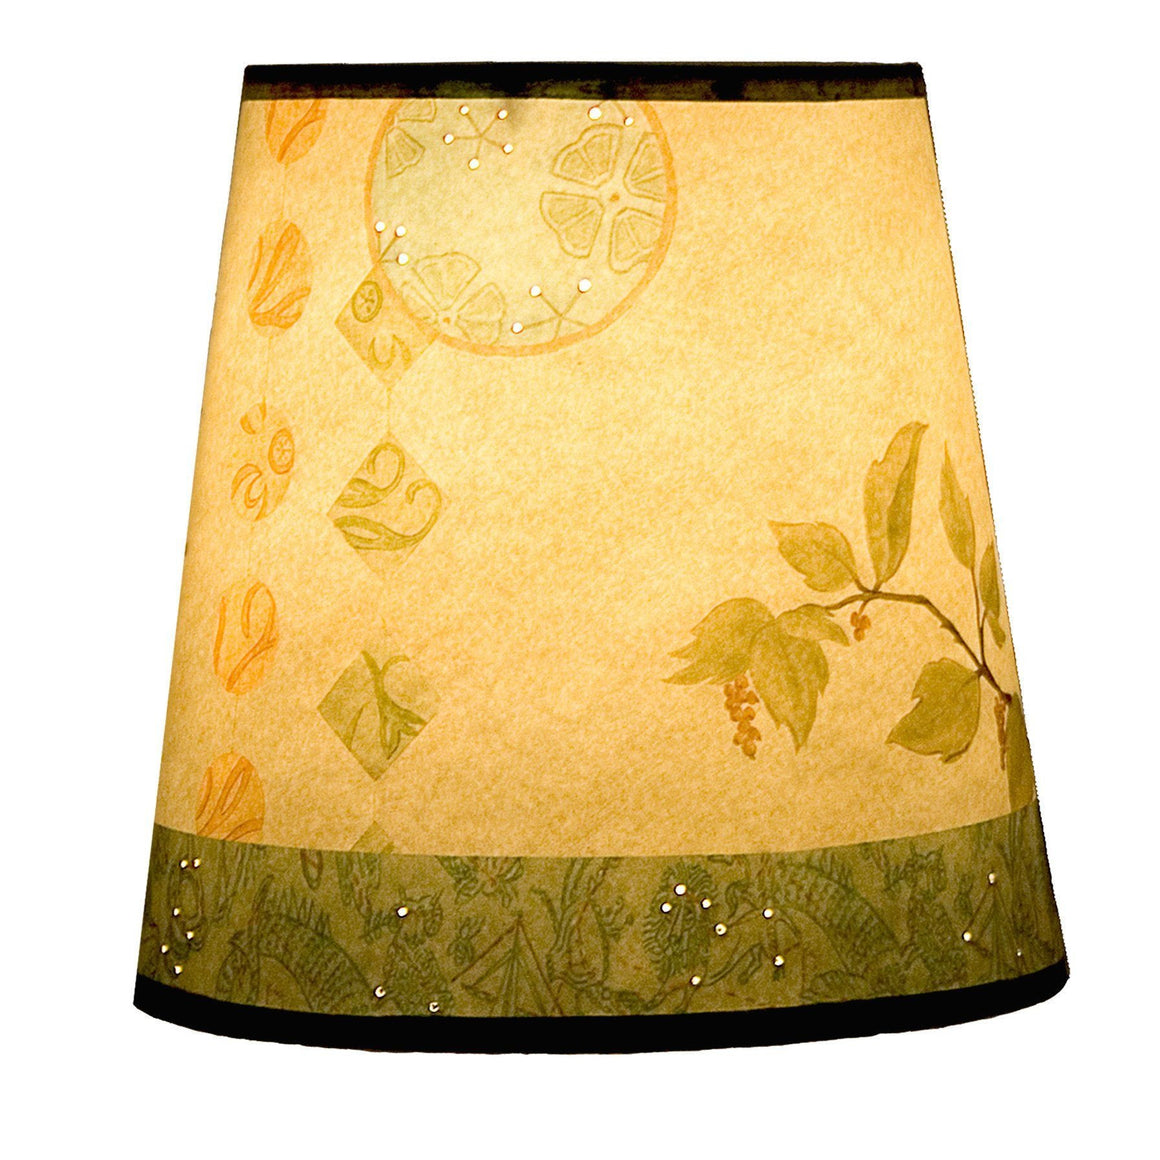 Small Drum Lamp Shade in Celestial Leaf